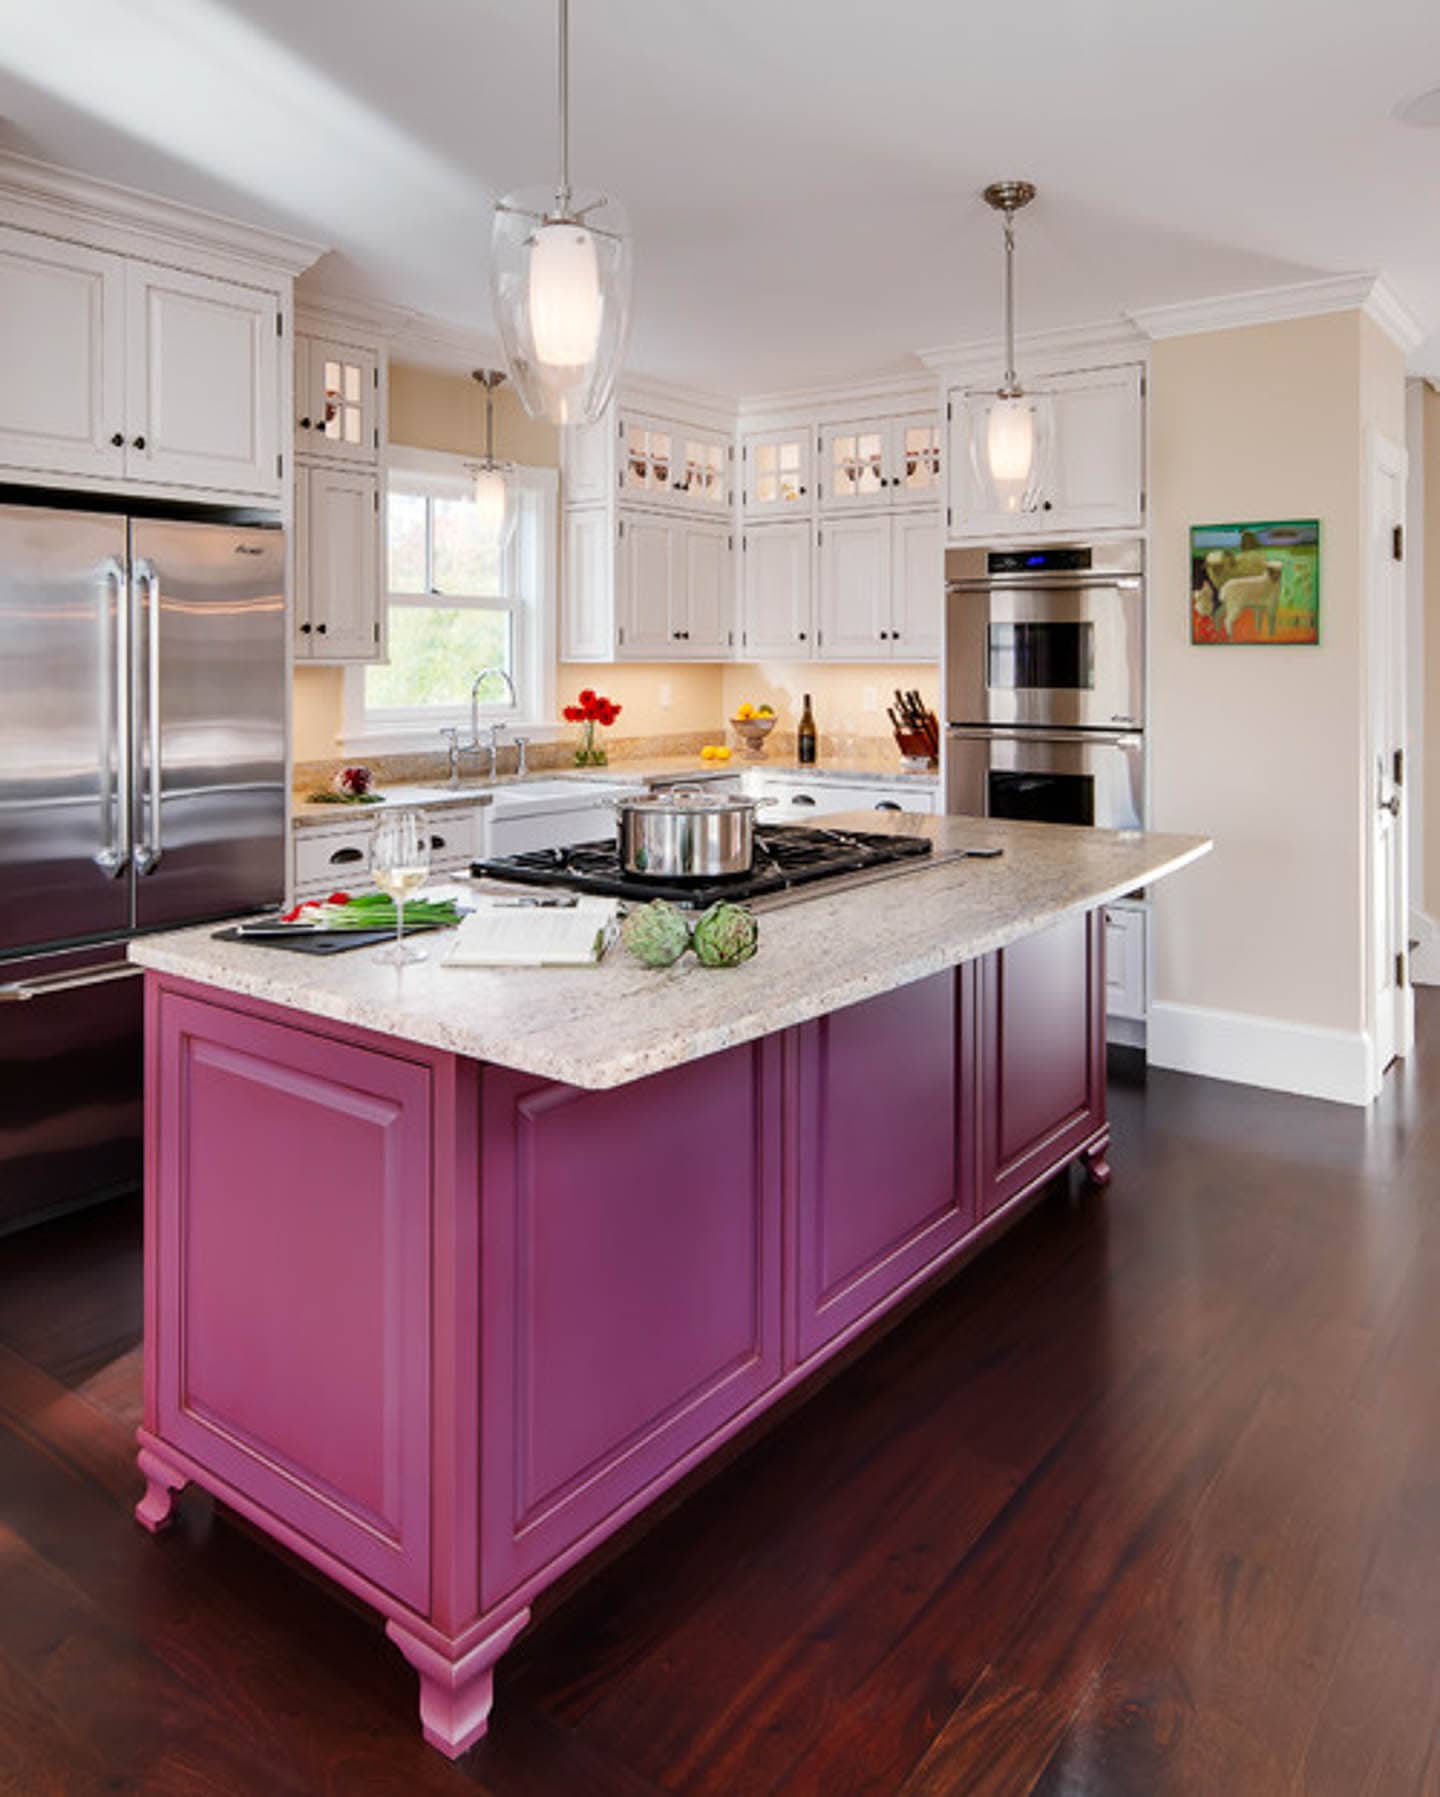 Traditional kitchen white white cabinets and countertops, and medium pink base cabinets in the island